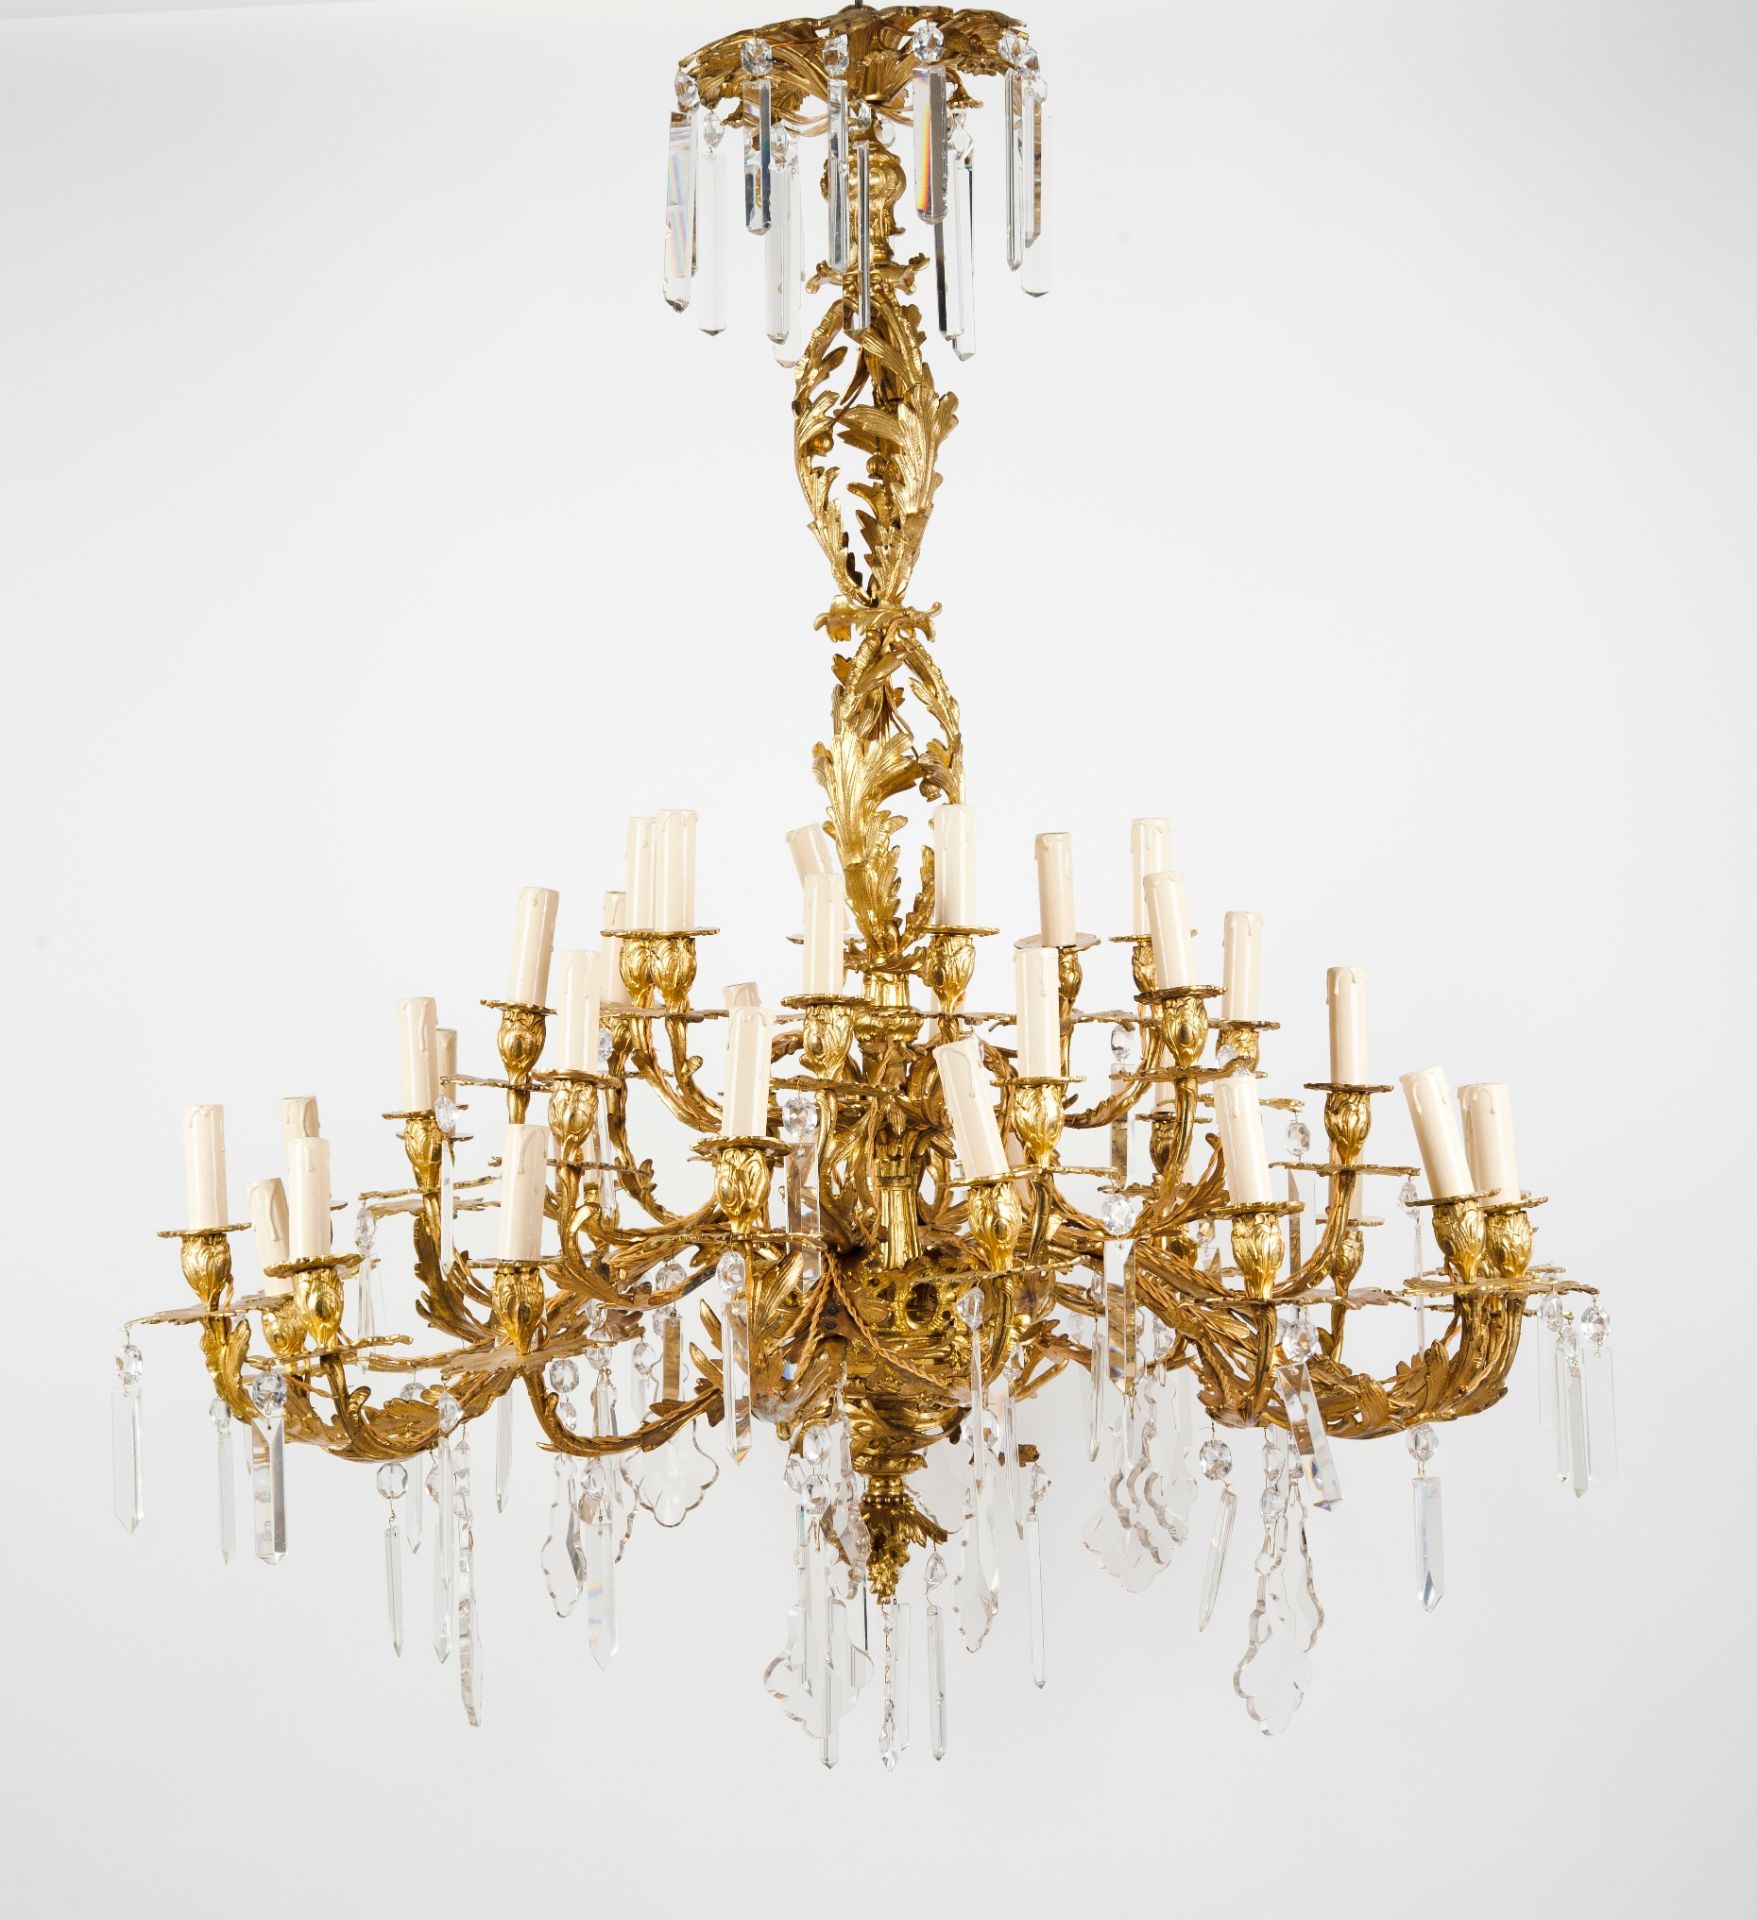 A large 36 branch Louis XV style chandelier